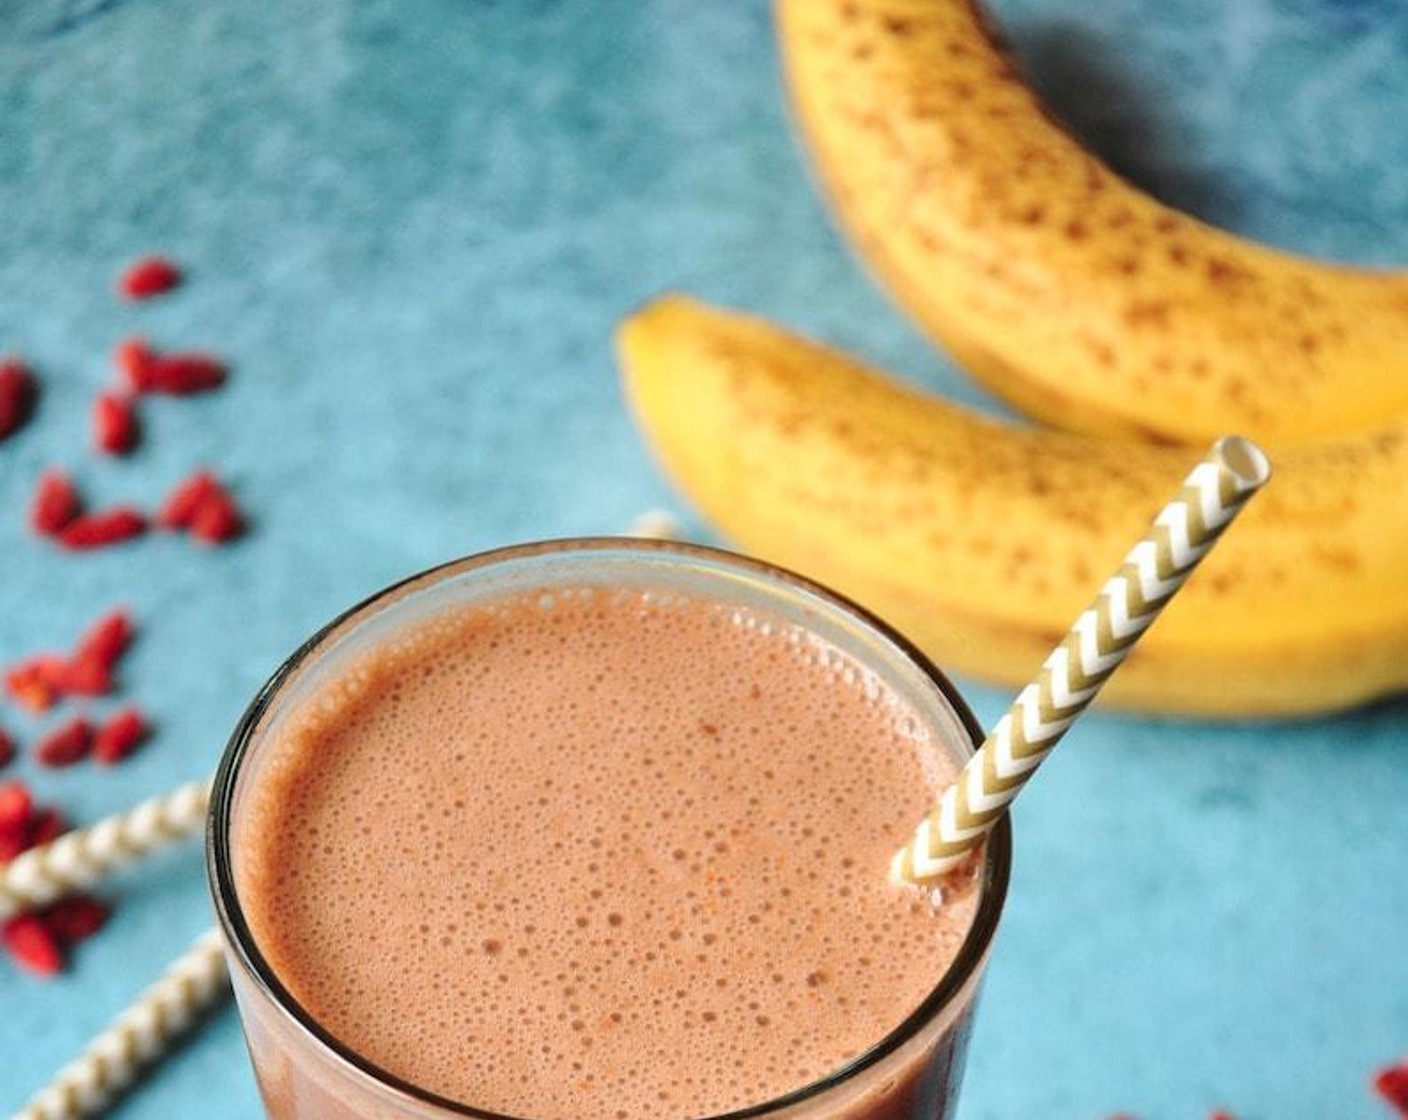 step 1 Add Almond Milk (1 cup) into a blender, followed by the Bananas (1 1/2). Add Greek Yogurt (1/4 cup) and top with Unsweetened Cocoa Powder (1 Tbsp) and Goji Berries (1 Tbsp).